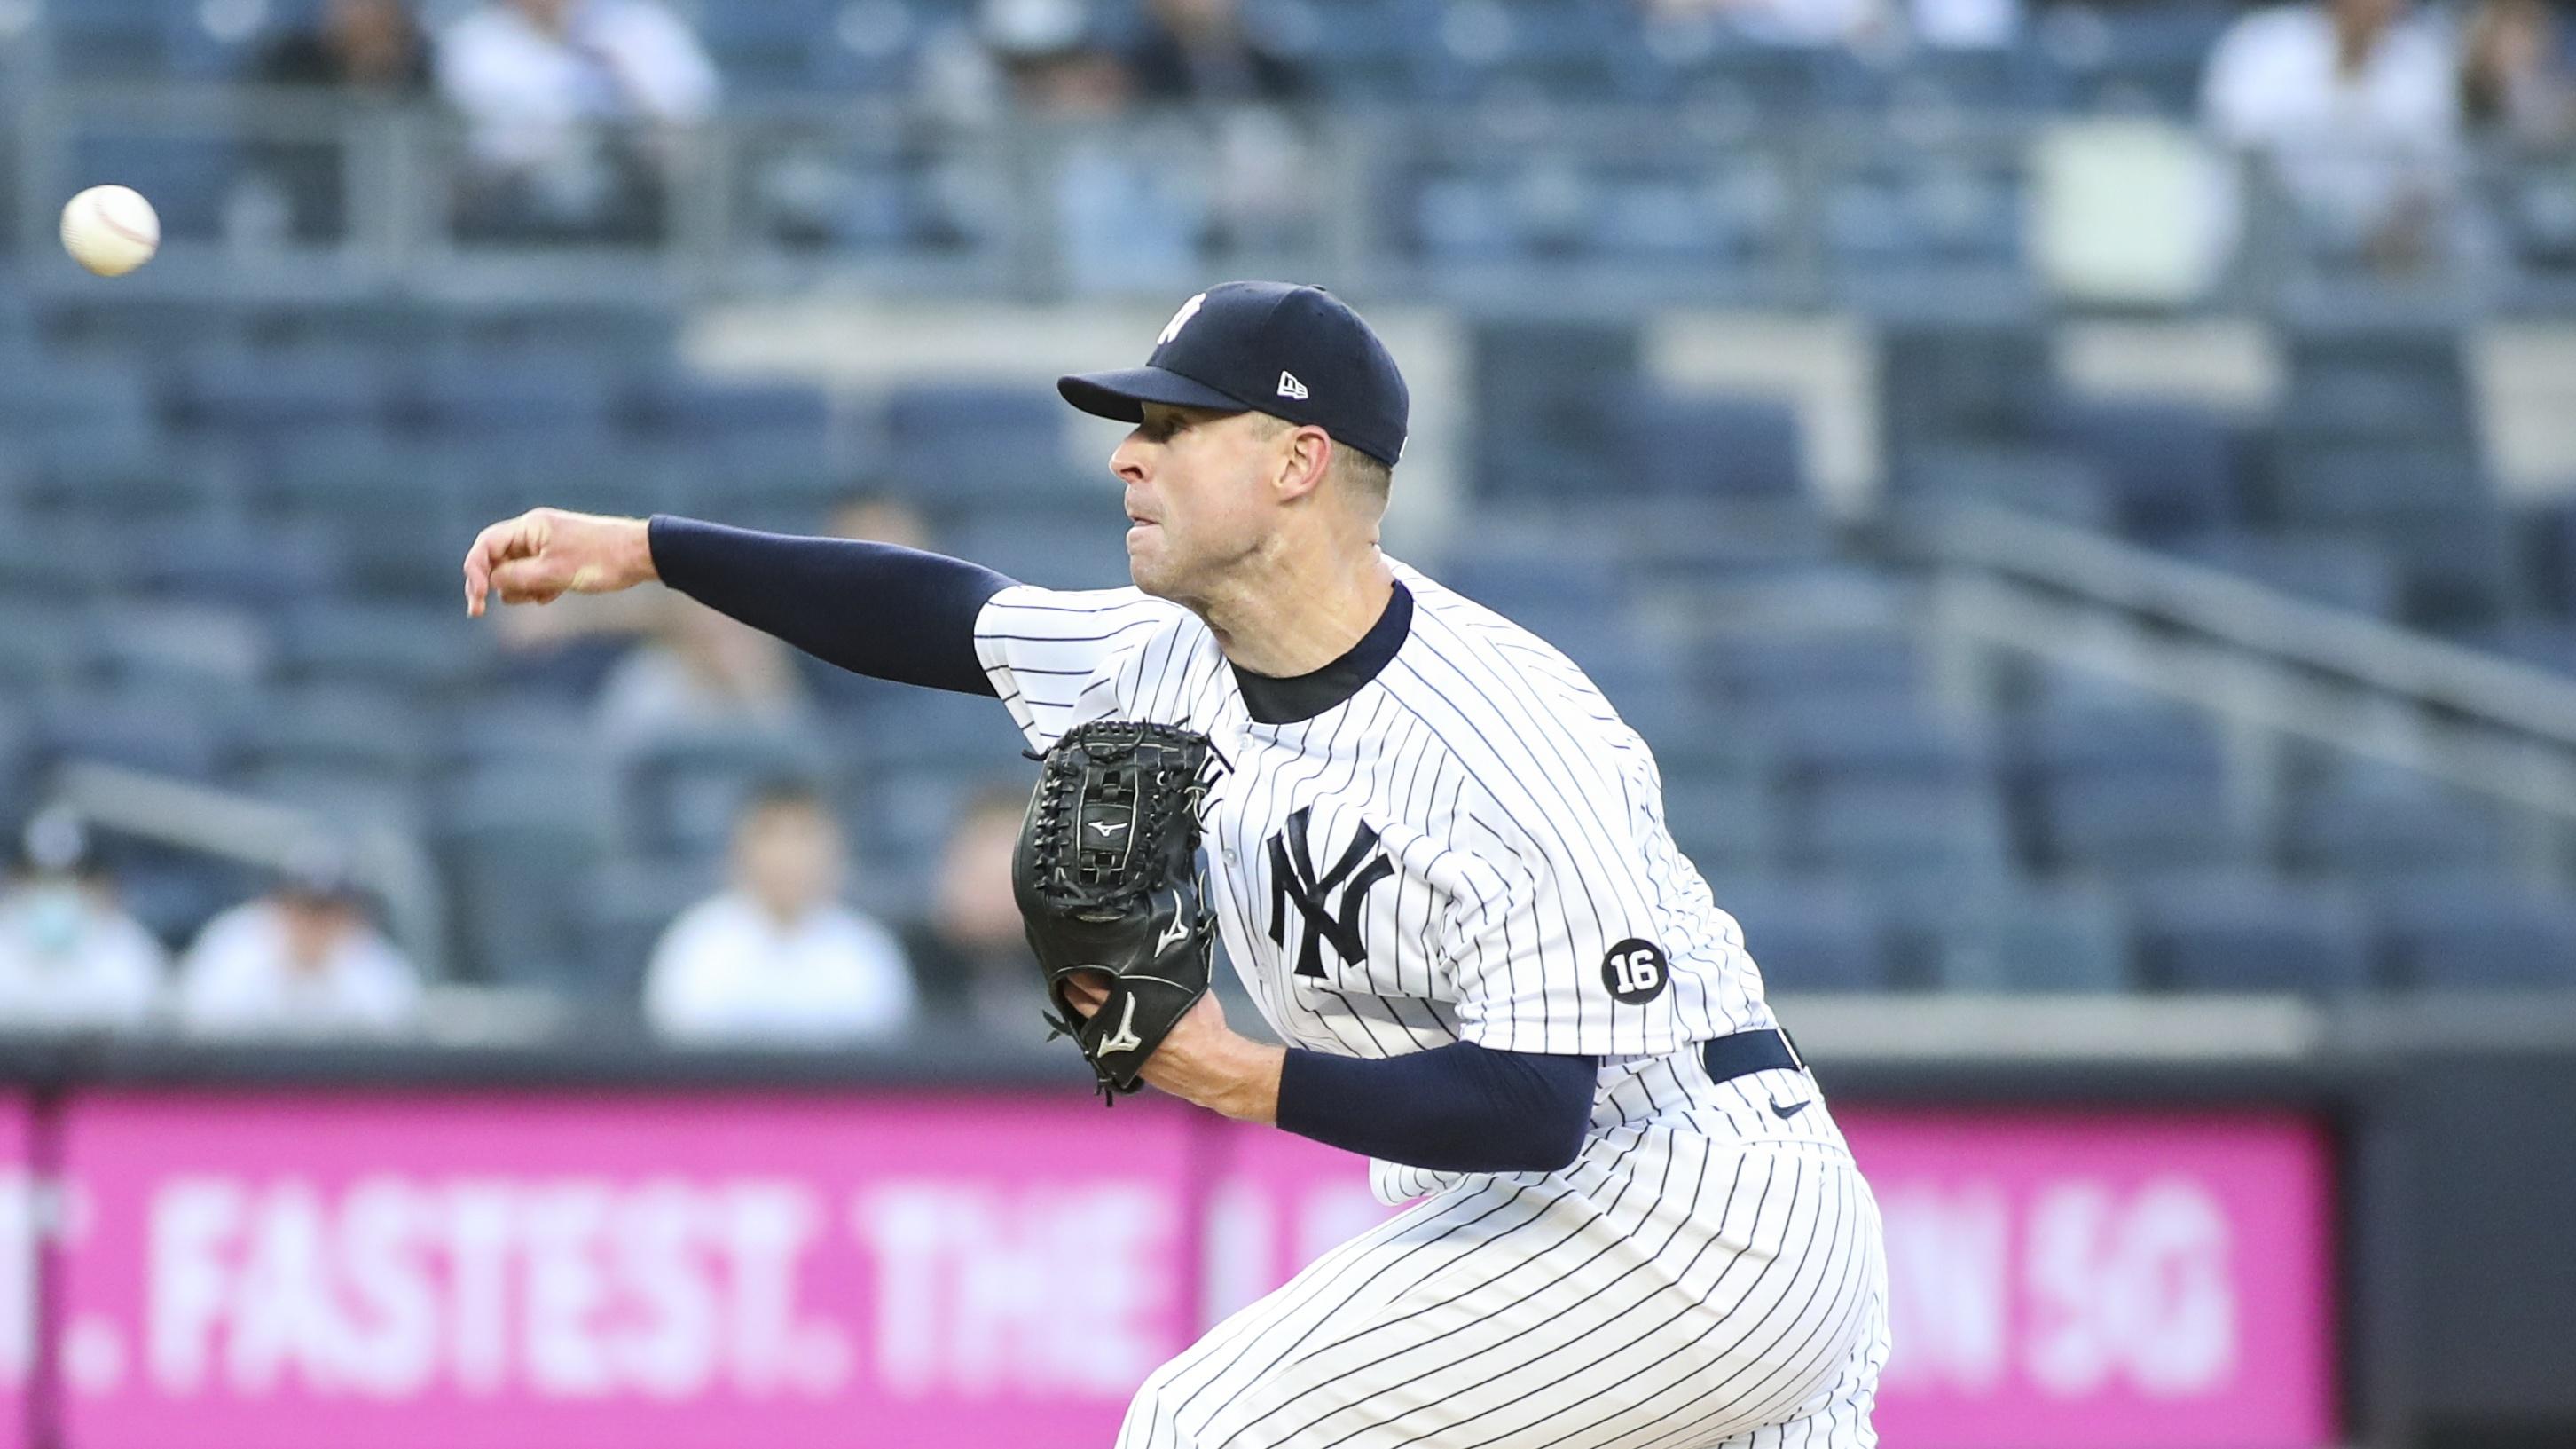 May 25, 2021; Bronx, New York, USA; New York Yankees pitcher Corey Kluber (28) pitches in the first inning against the Toronto Blue Jays at Yankee Stadium. Mandatory Credit: Wendell Cruz-USA TODAY Sports / © Wendell Cruz-USA TODAY Sports